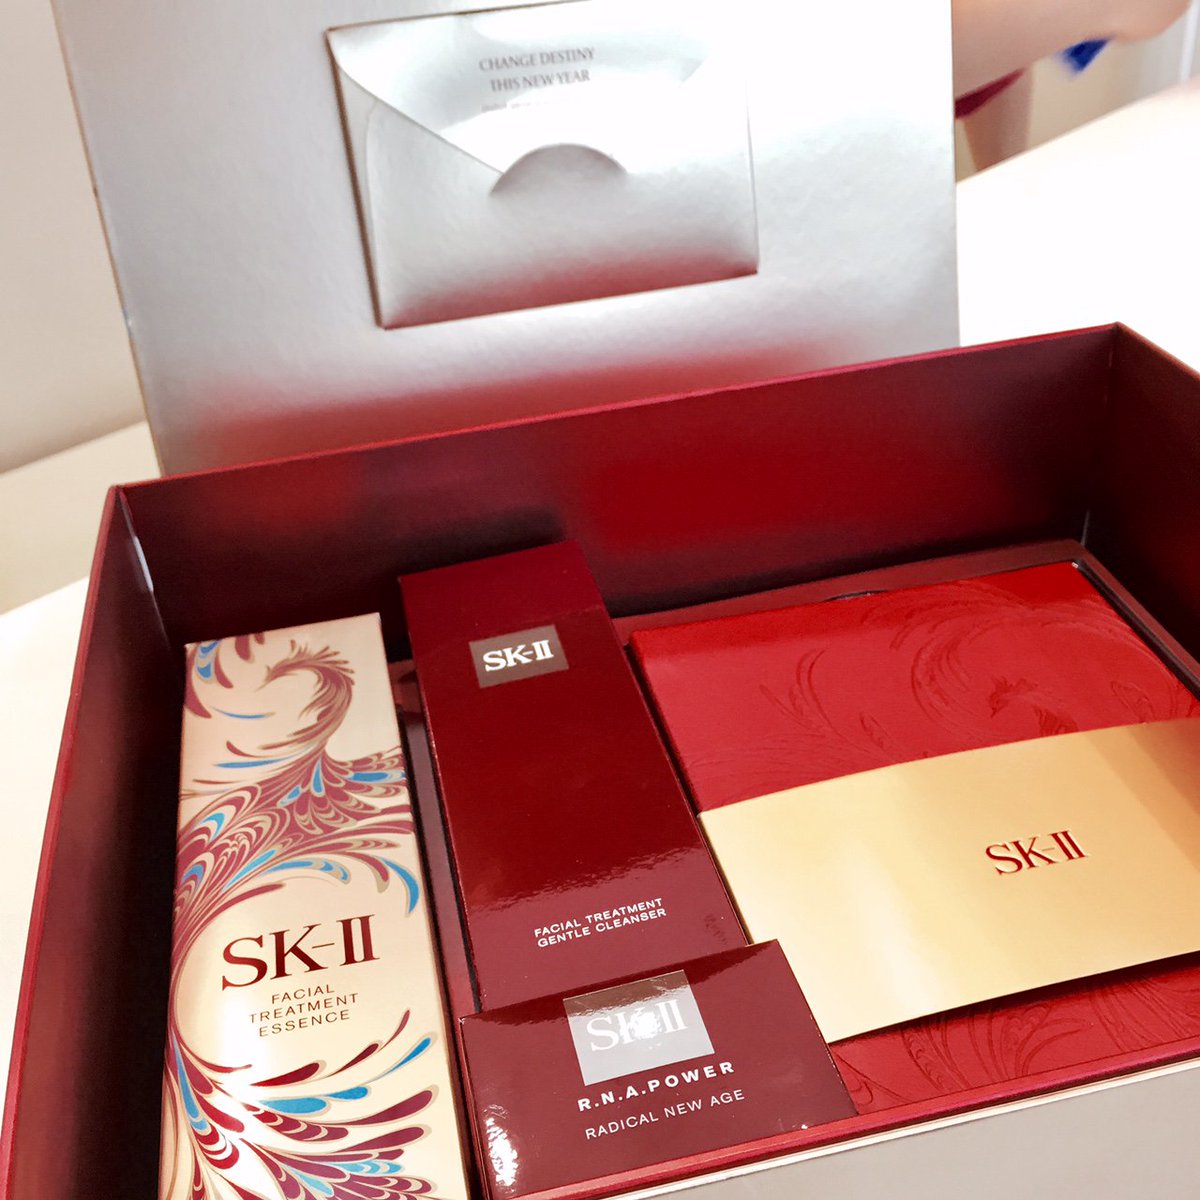 Lotte Avenue On Twitter Sk Ii Heritage Set For Idr 3 391 000 Comes With Gift Purchase Ft Gentle Cleanser And Exclusive Agenda 2017